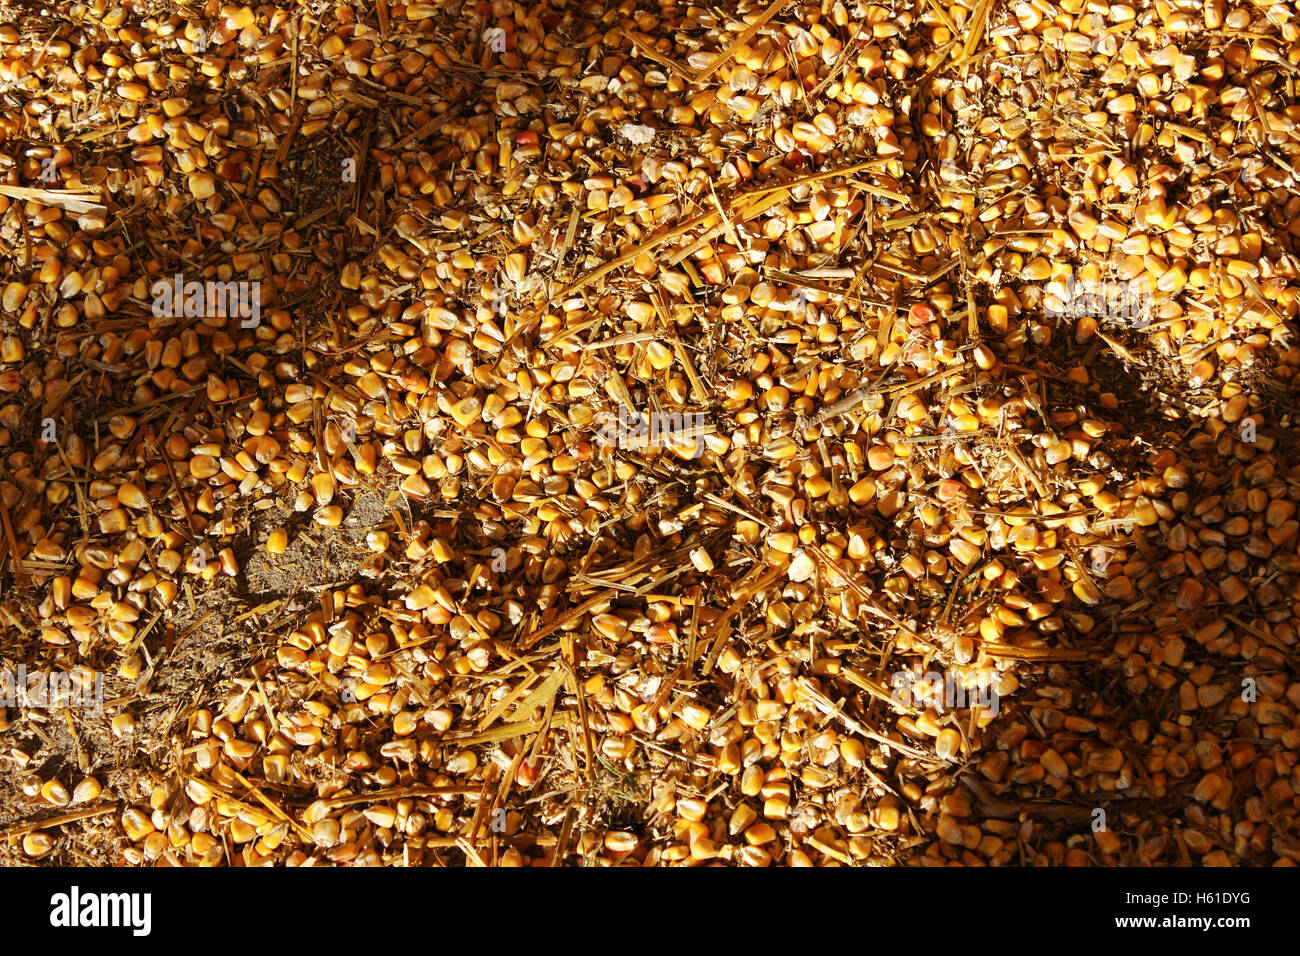 close up of grain or corn or animal feed lying on the ground Stock Photo